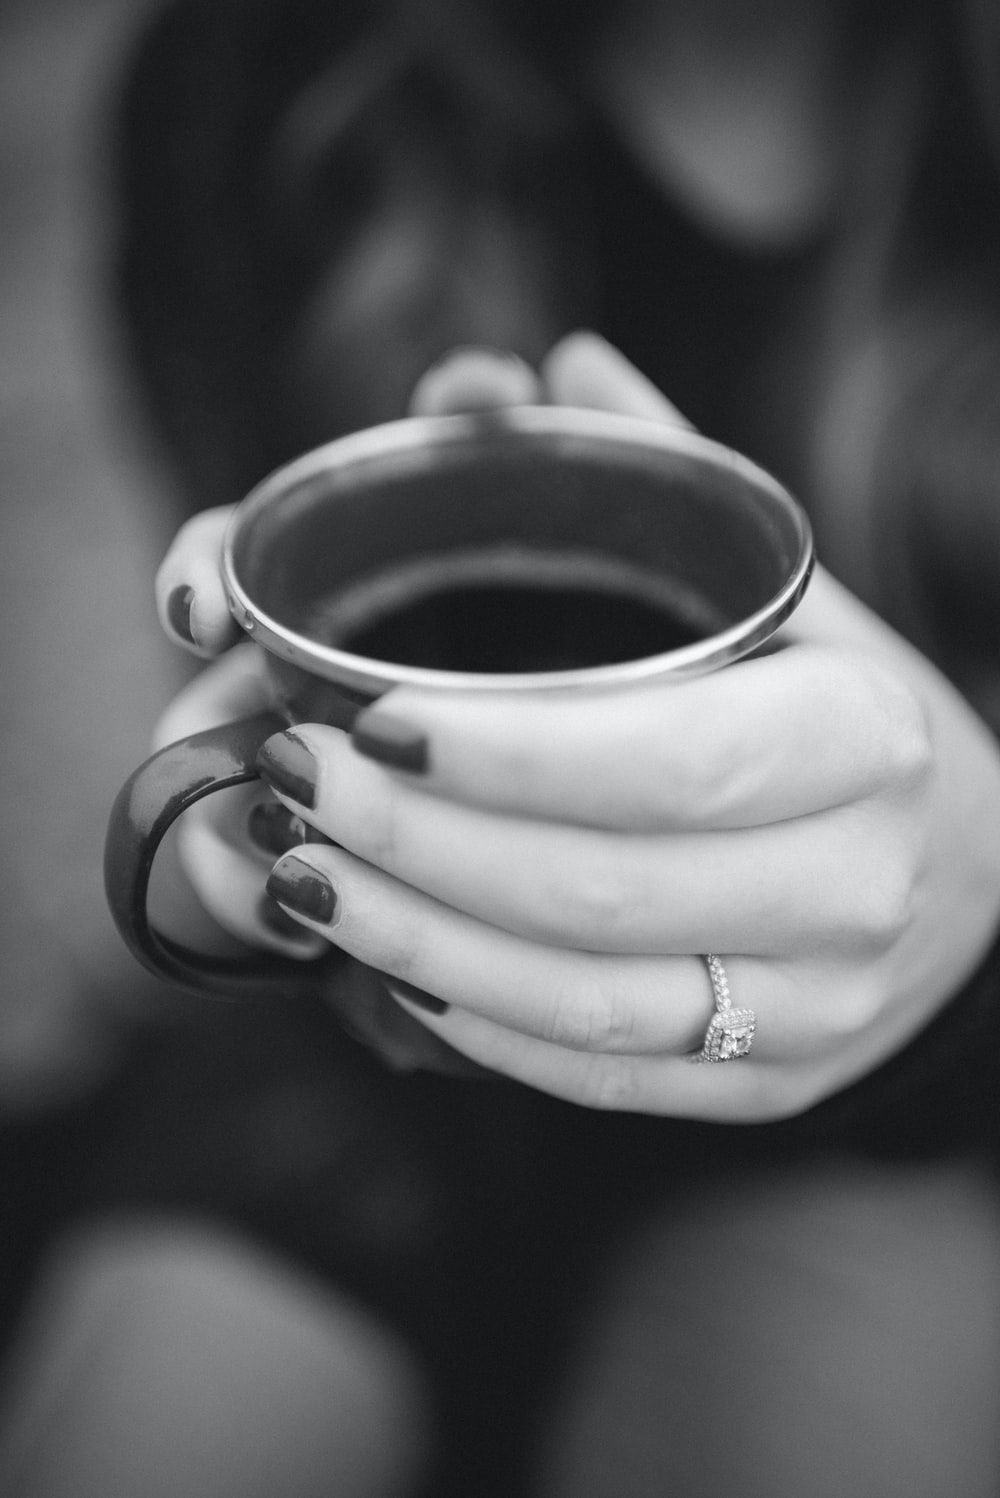 Holding Coffee Picture. Download Free Image